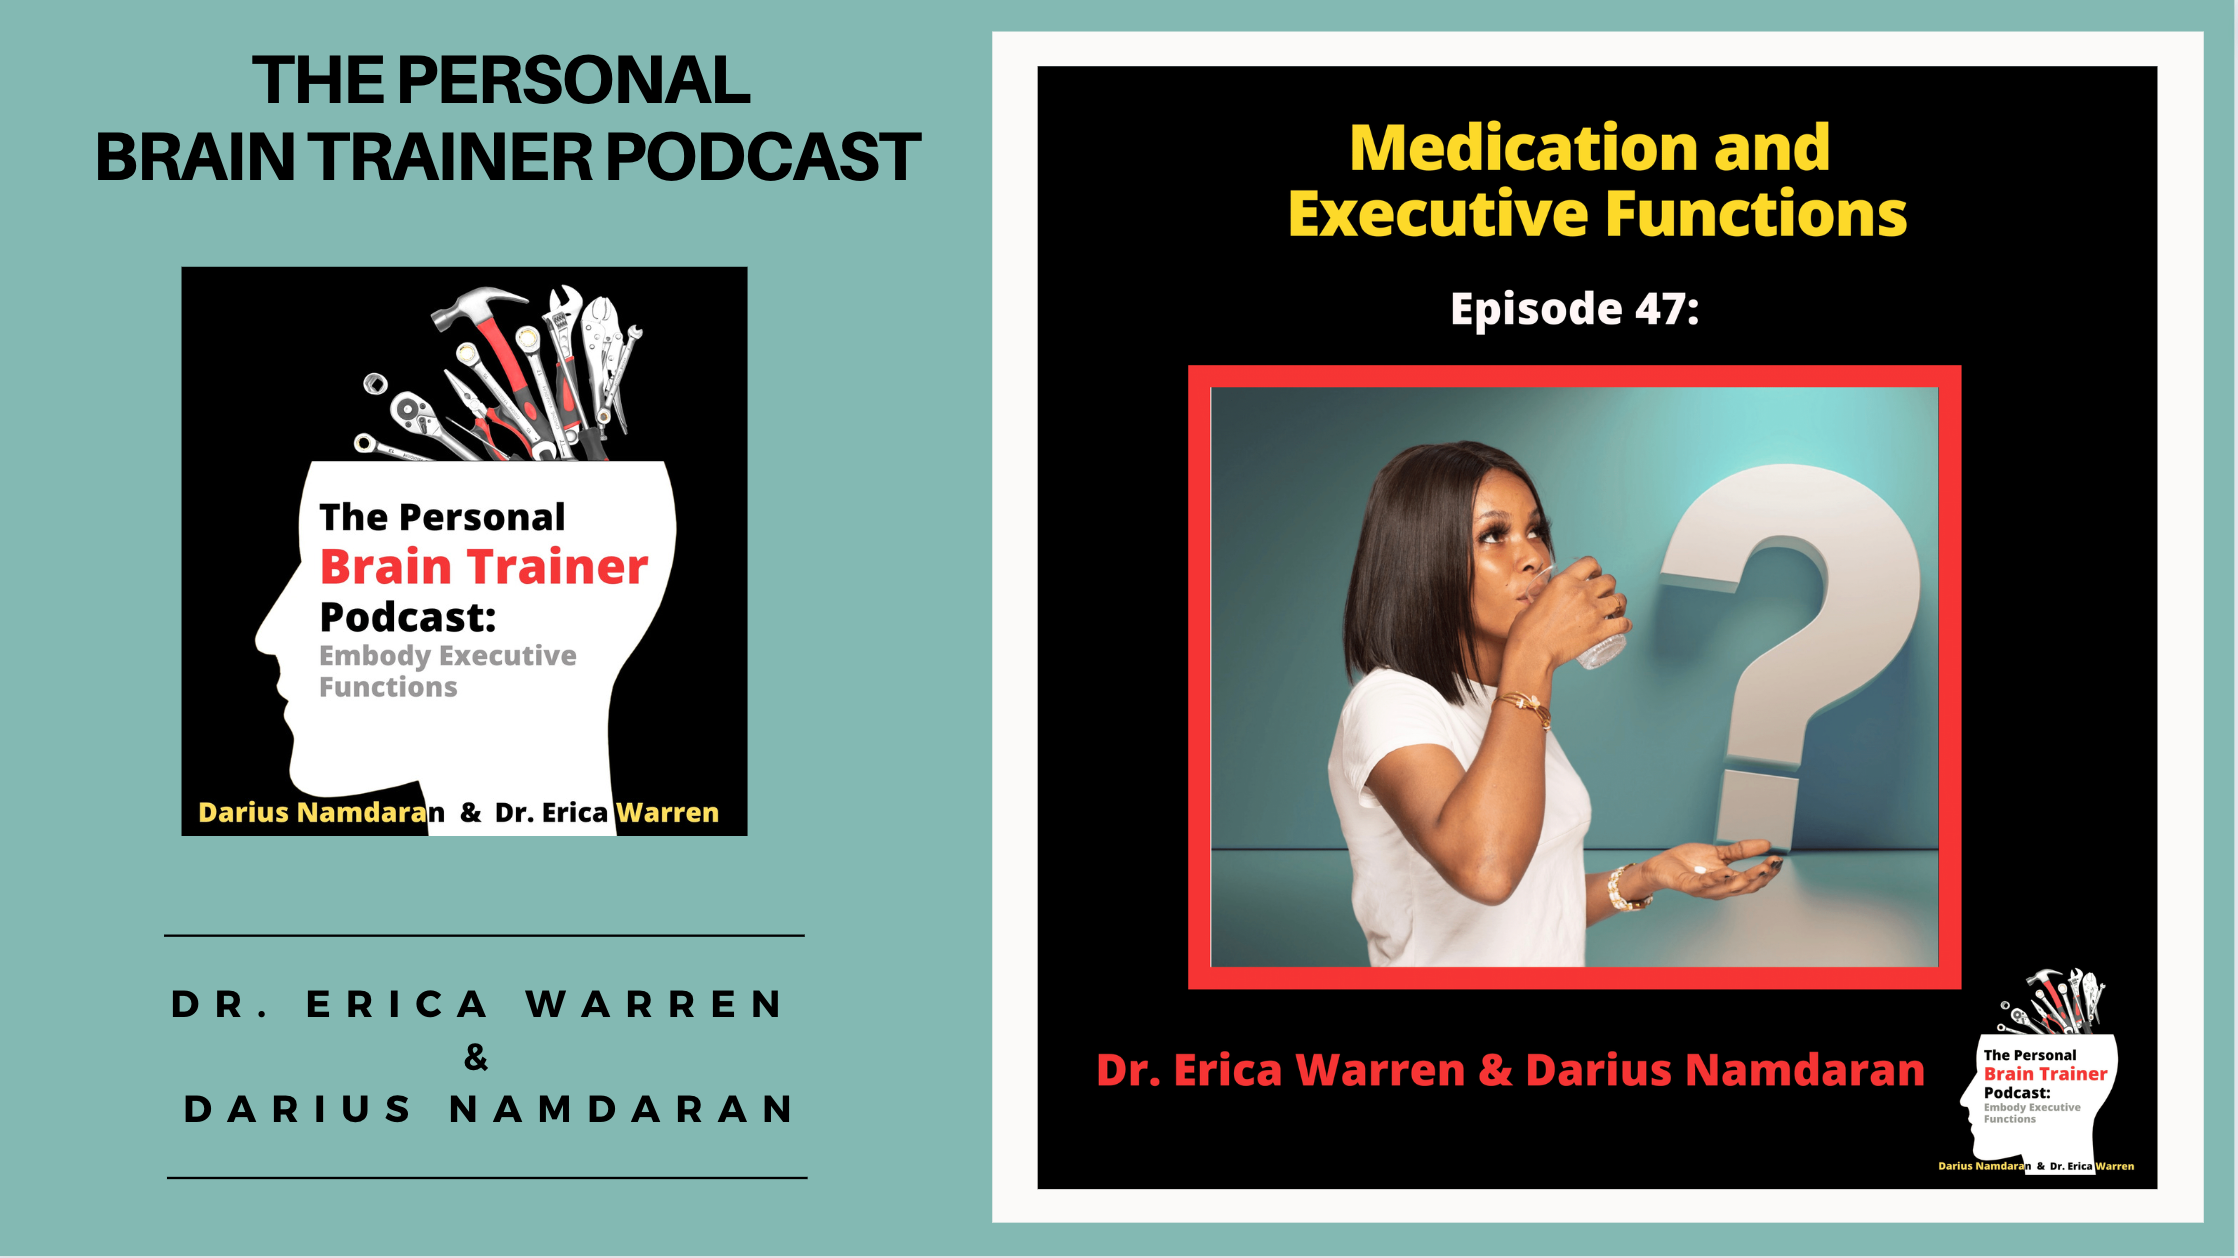 Executive Functioning and Medications